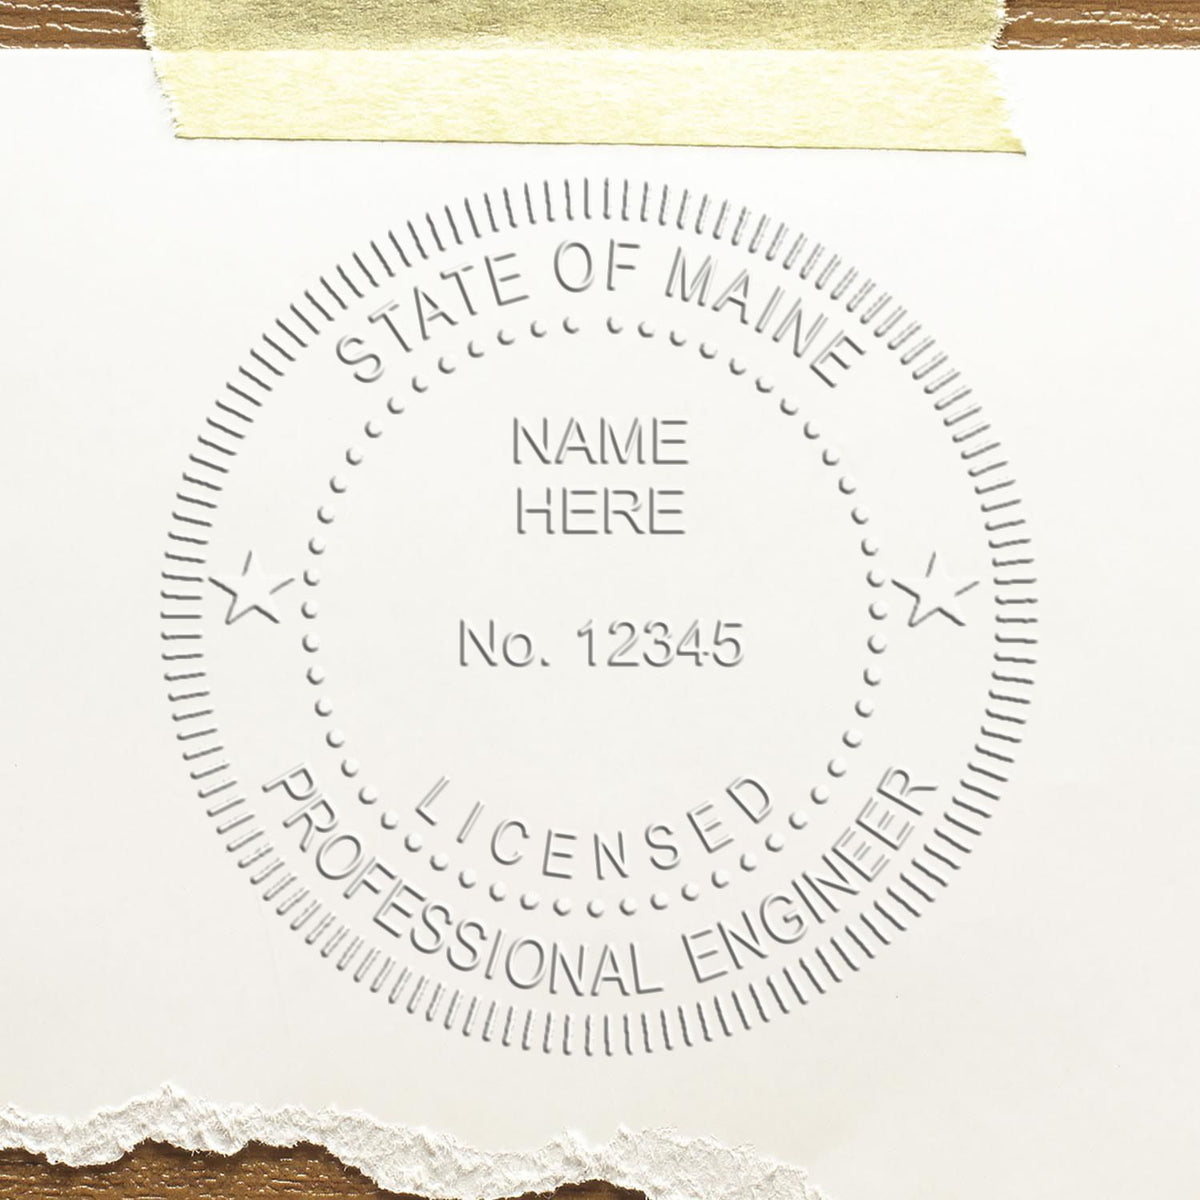 A photograph of the Long Reach Maine PE Seal stamp impression reveals a vivid, professional image of the on paper.